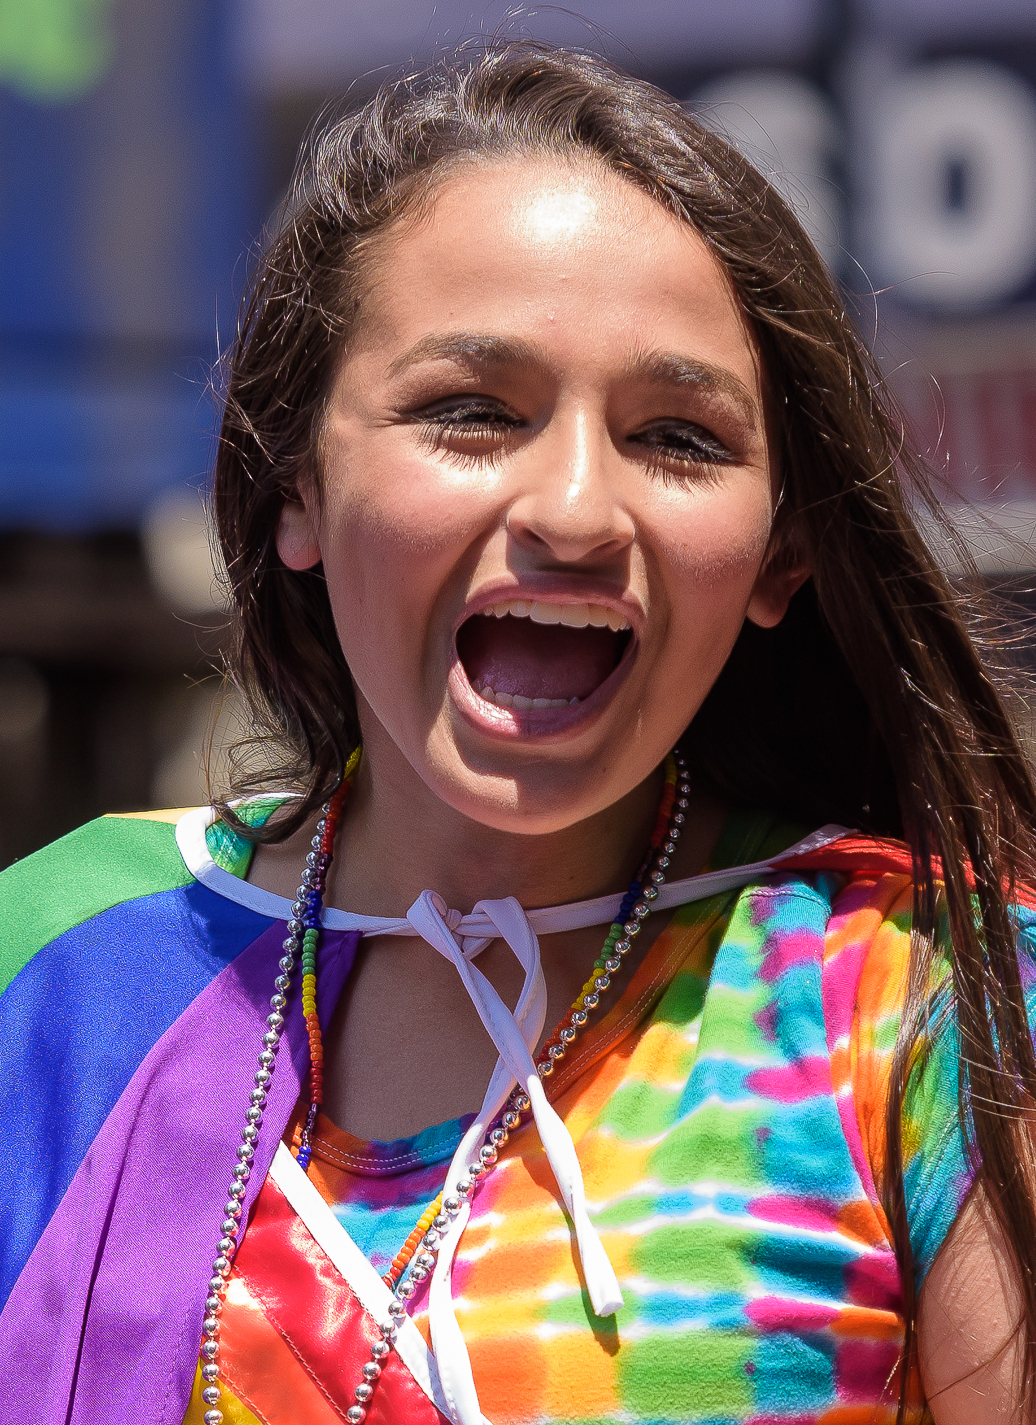 Jazz Jennings, American internet personality was born on October 6, 2000.